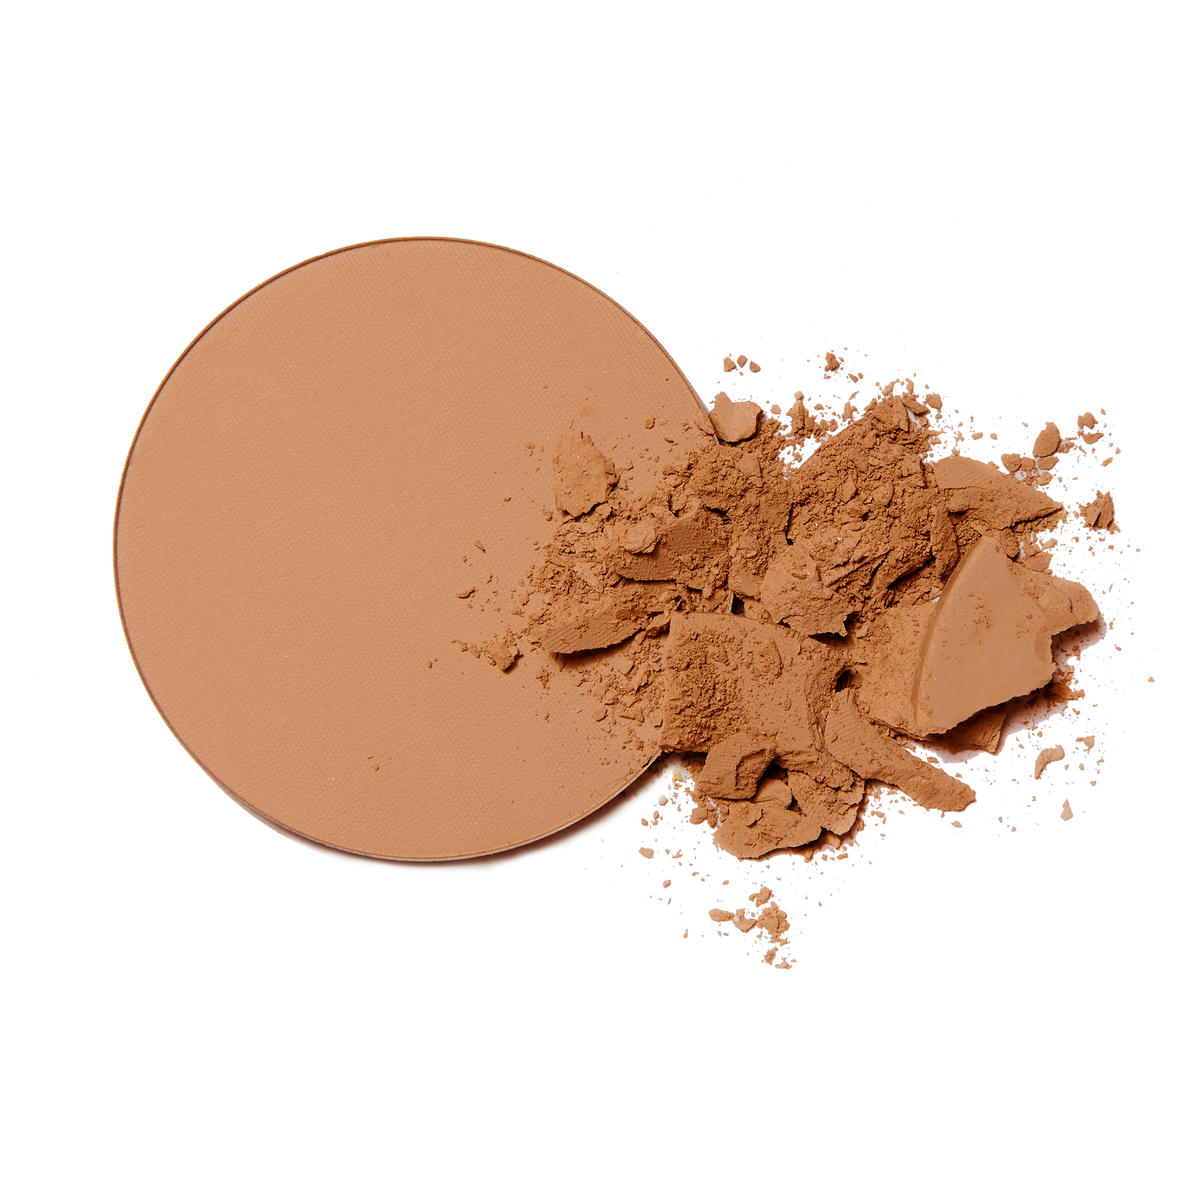 Inika Make up - Baked Mineral Bronzer - Sunkissed